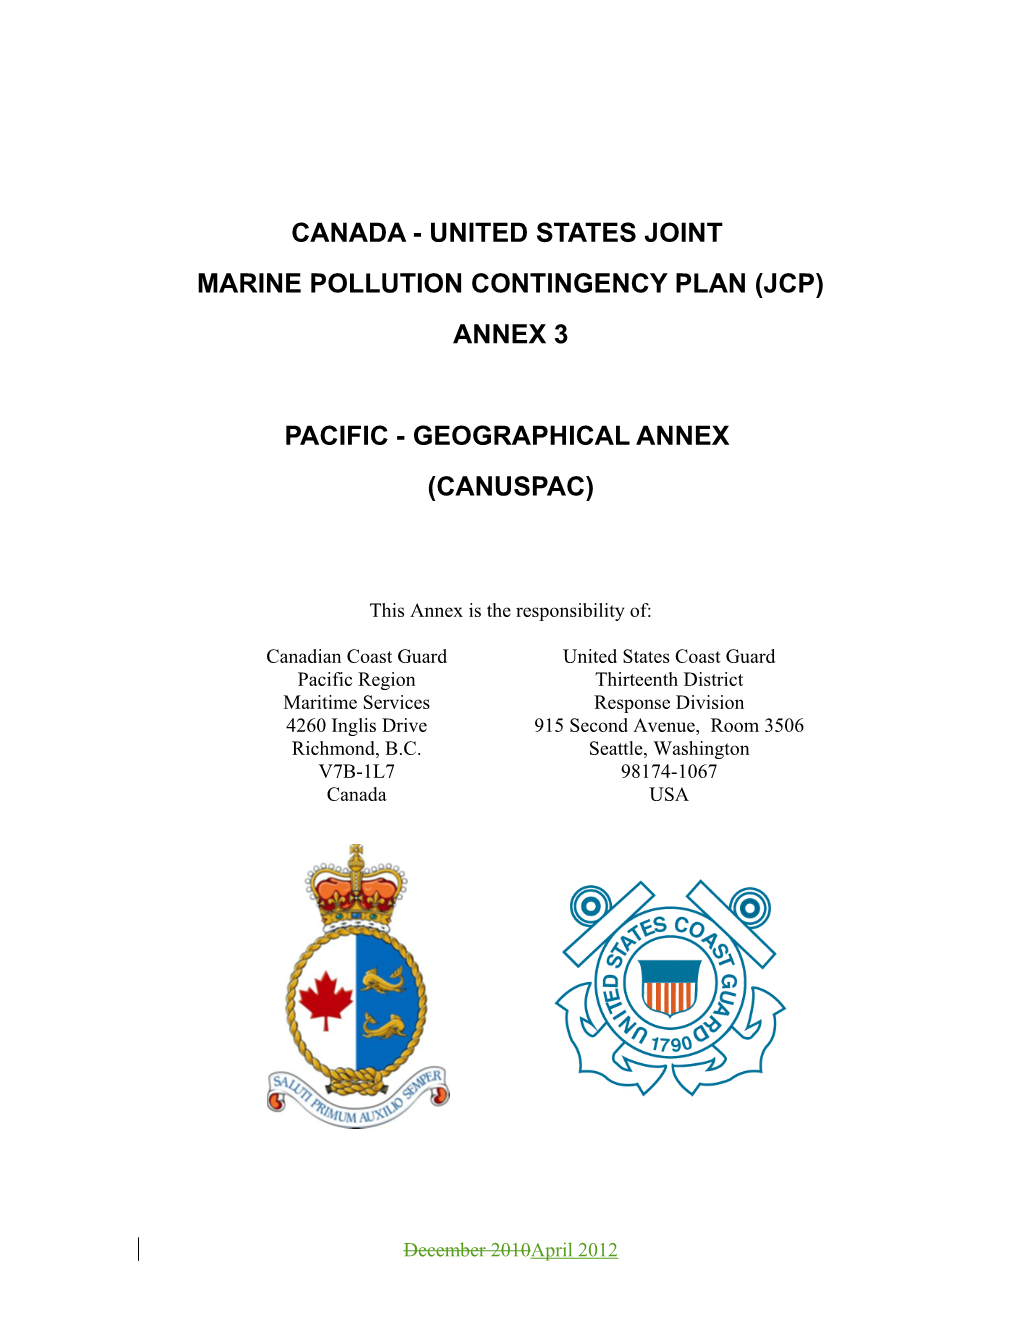 Canada - United States Joint